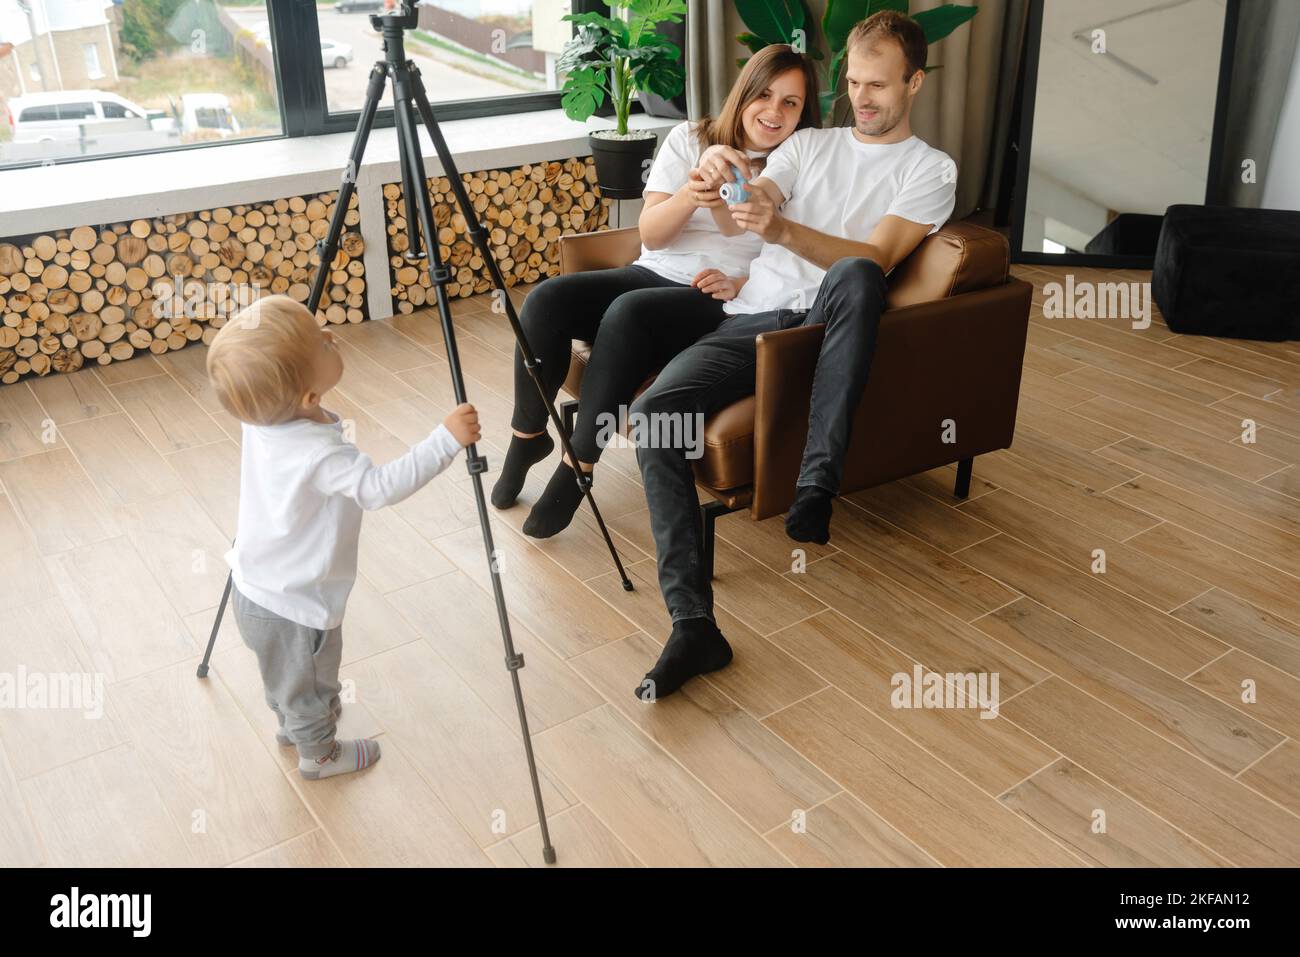 A child blogger holds a video tripod and prepares to become a young blogger. The parents are sitting next to each other in a chair. Stock Photo